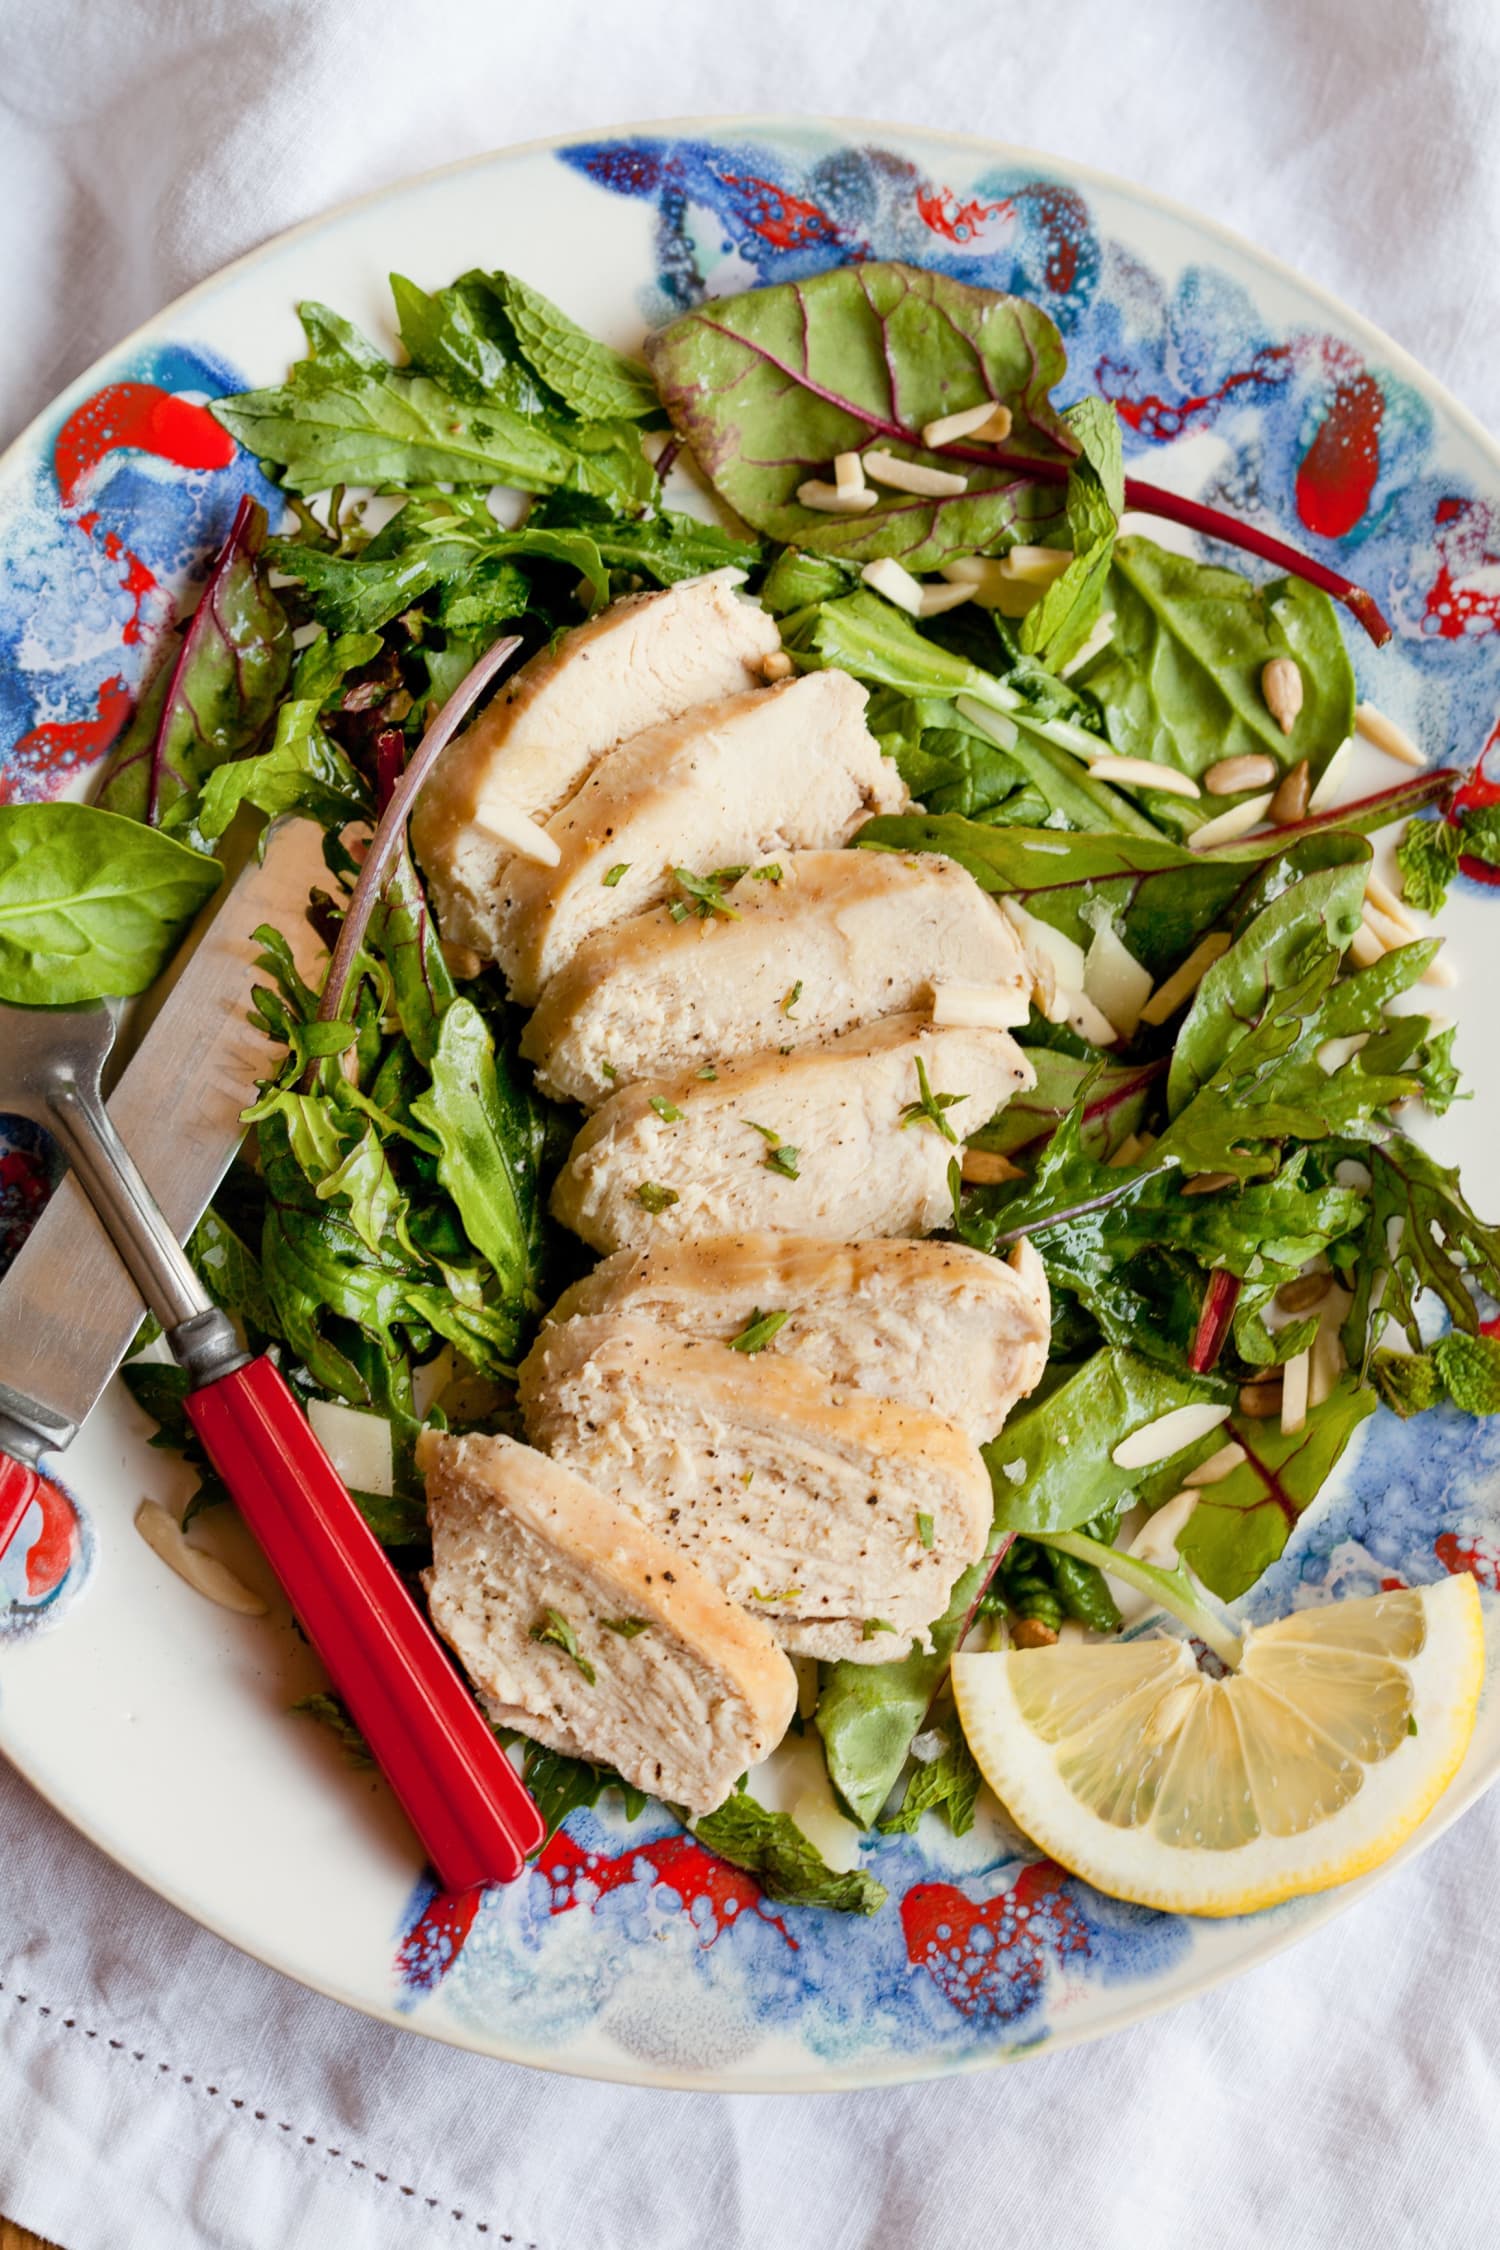 3 Faster Ways to Cook a Chicken Breast